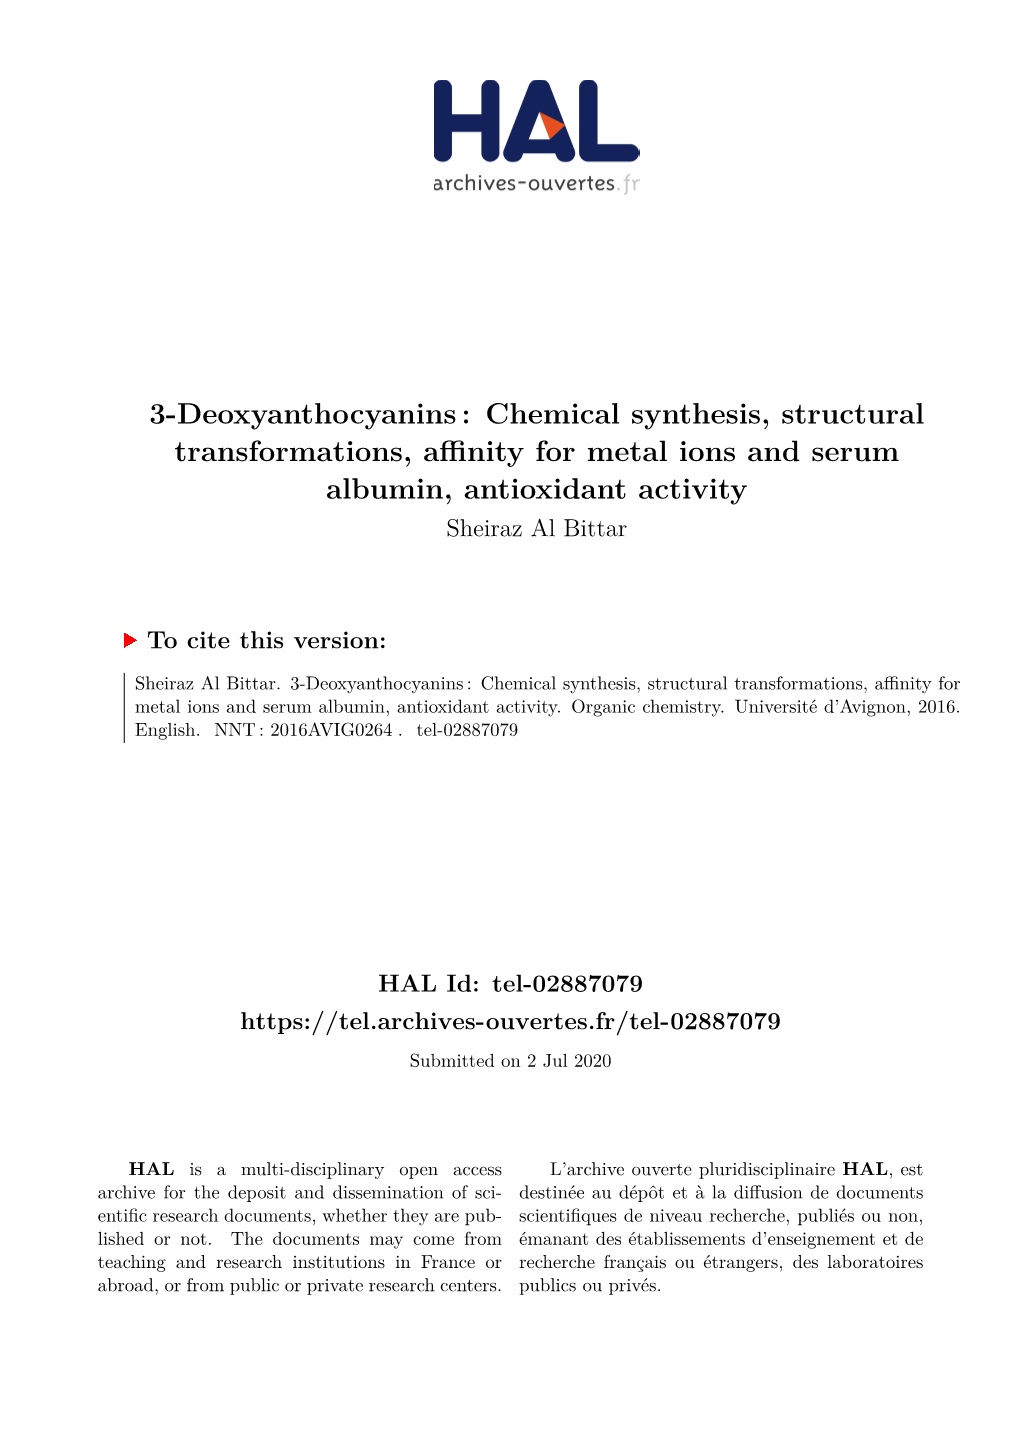 Chemical Synthesis, Structural Transformations, Affinity for Metal Ions and Serum Albumin, Antioxidant Activity